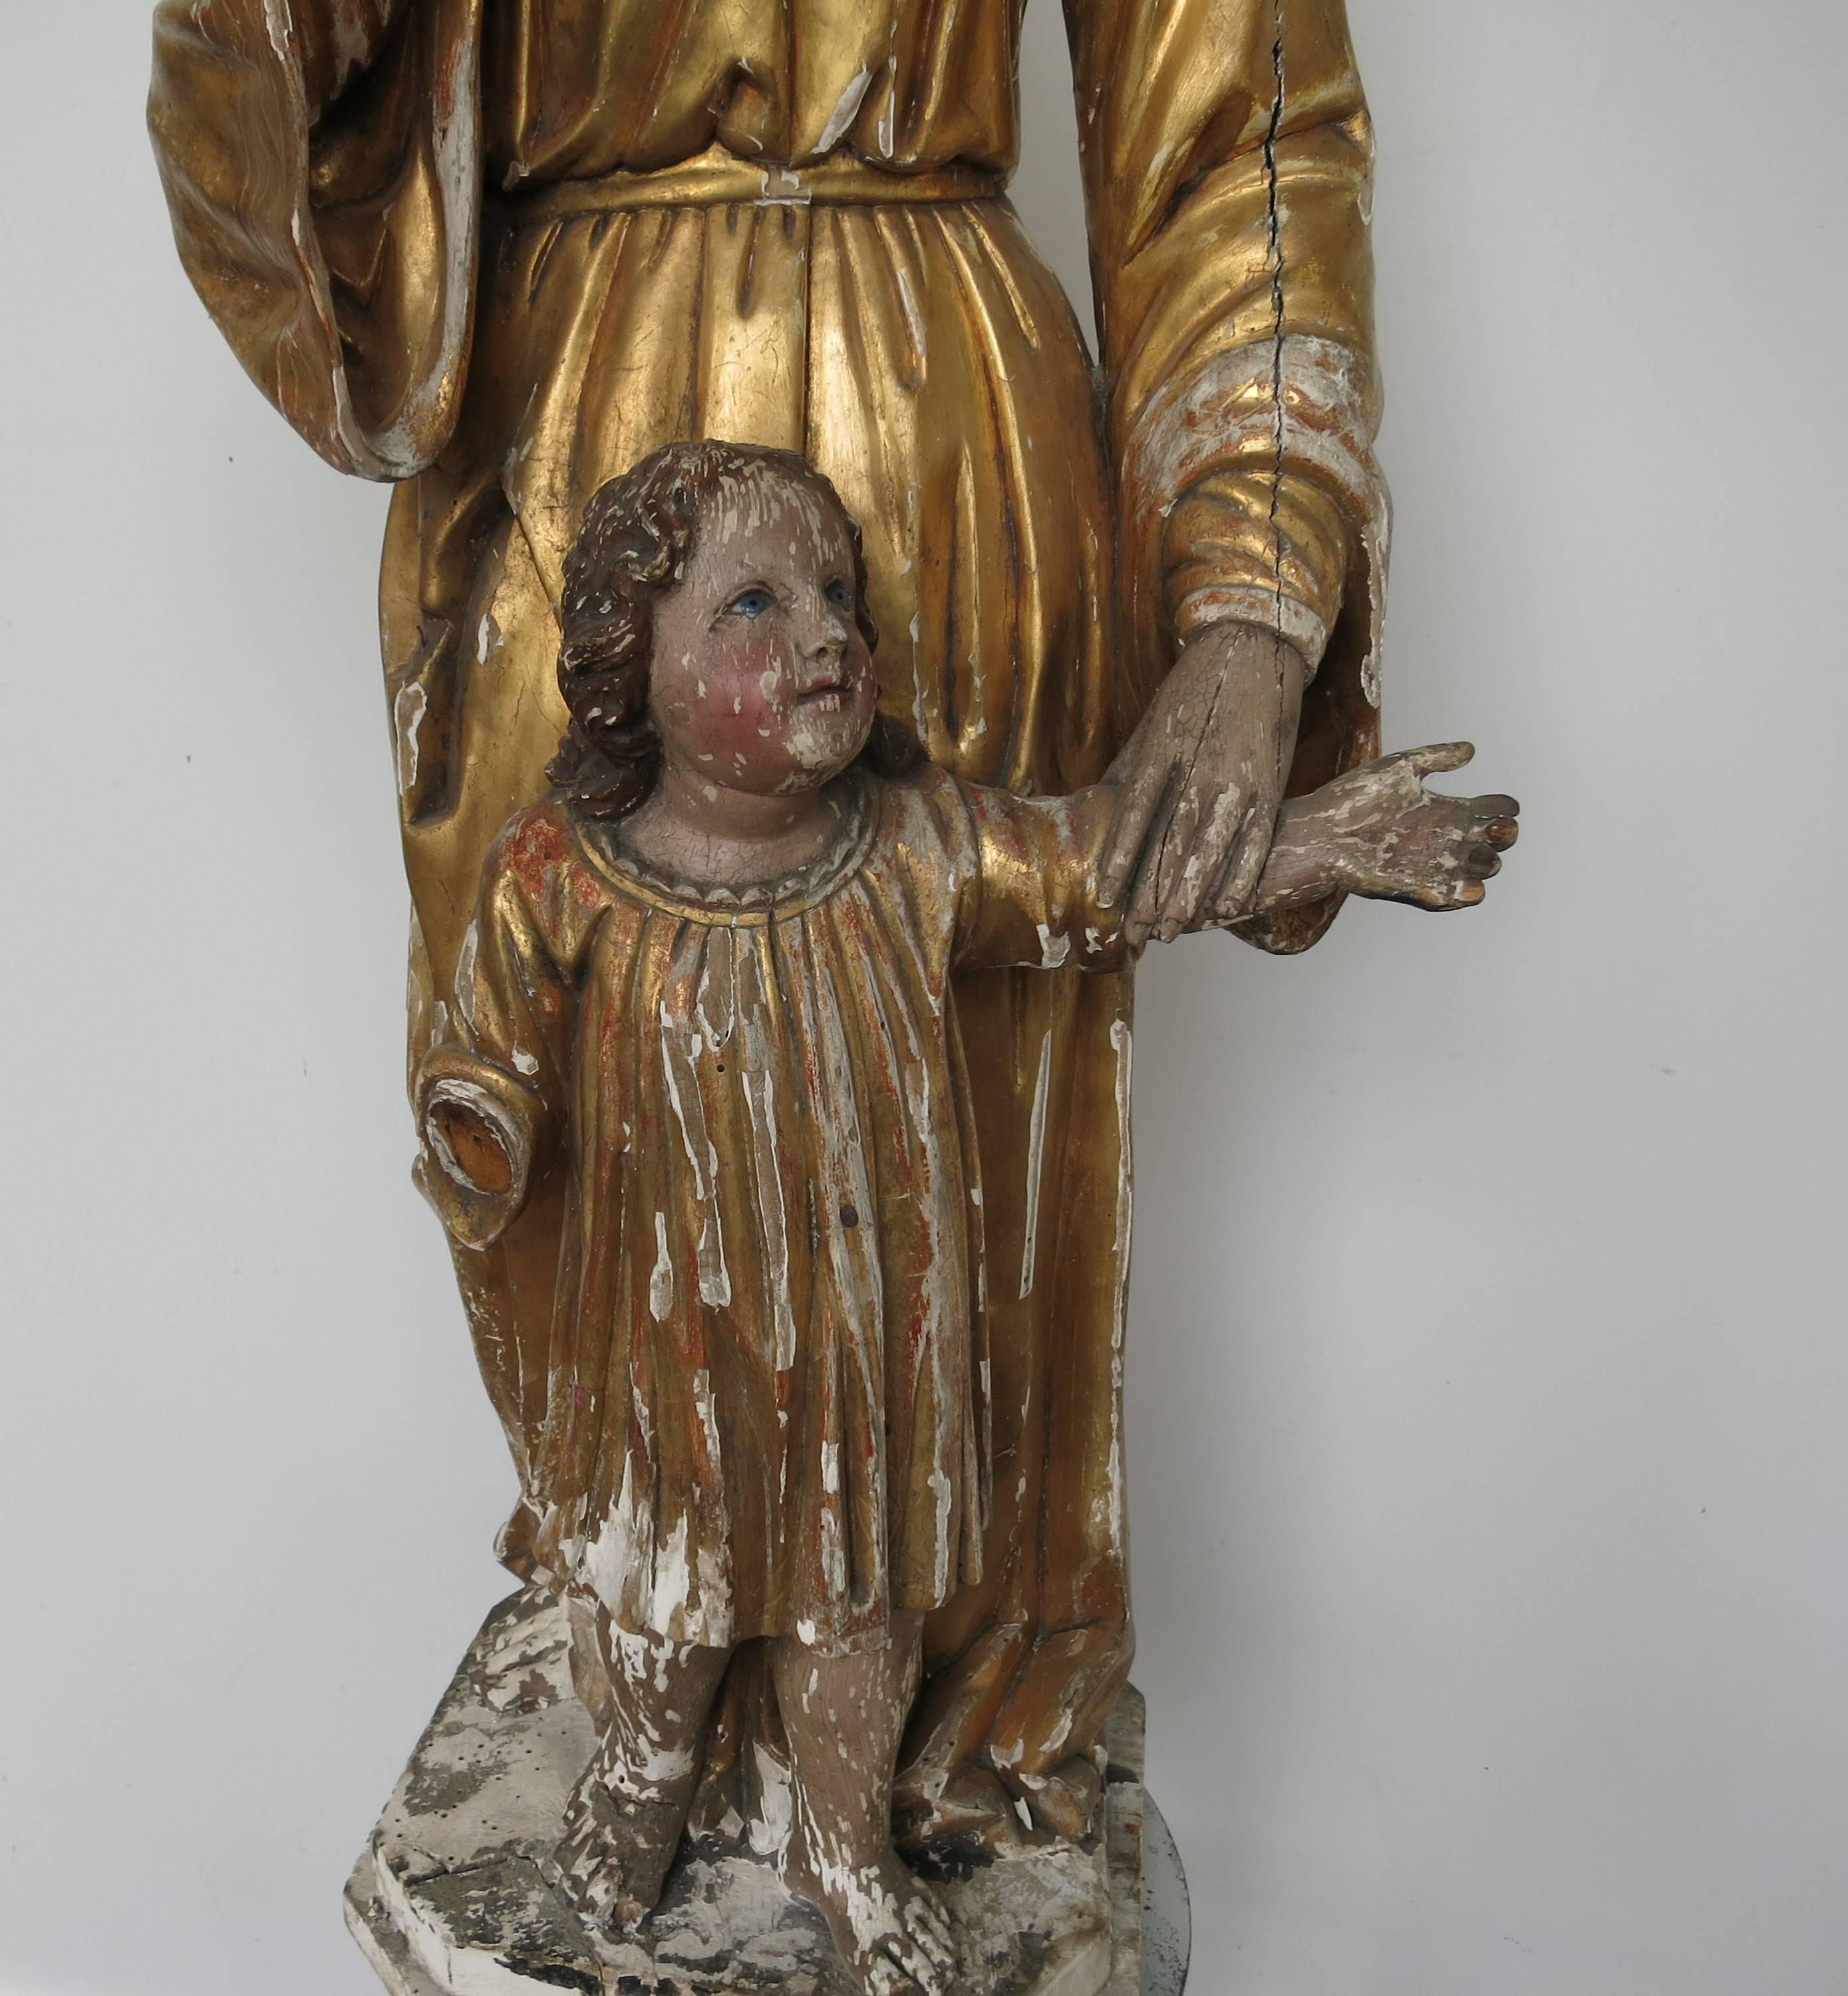 Carved and gilded European statue, possibly French from the 19th century. Distressed and missing its wings. Measure: It stands 37